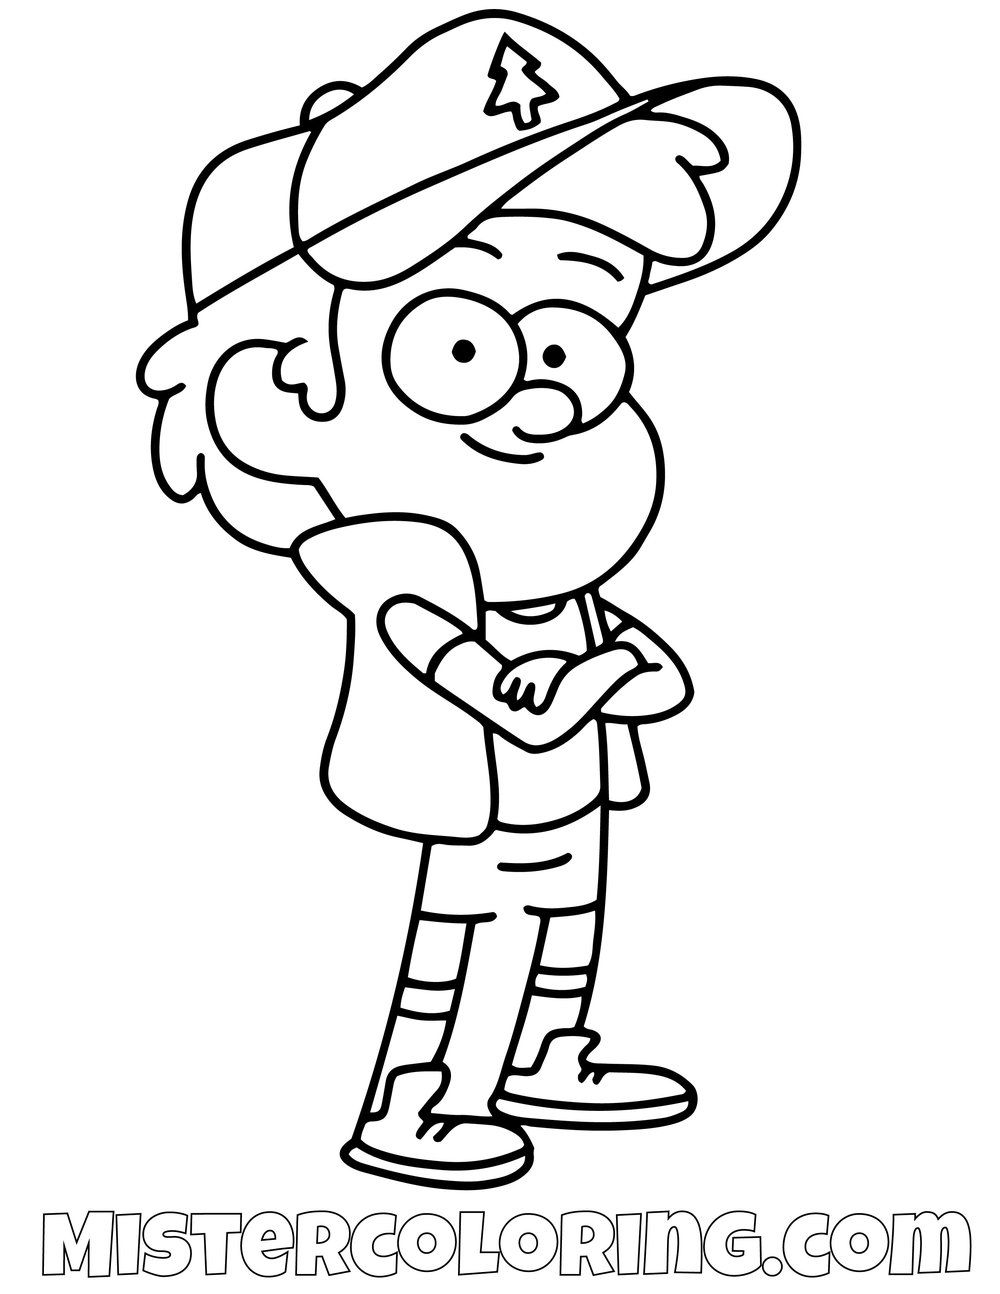 Dipper Pines Posing Gravity Falls Coloring Pages For Kids in ...